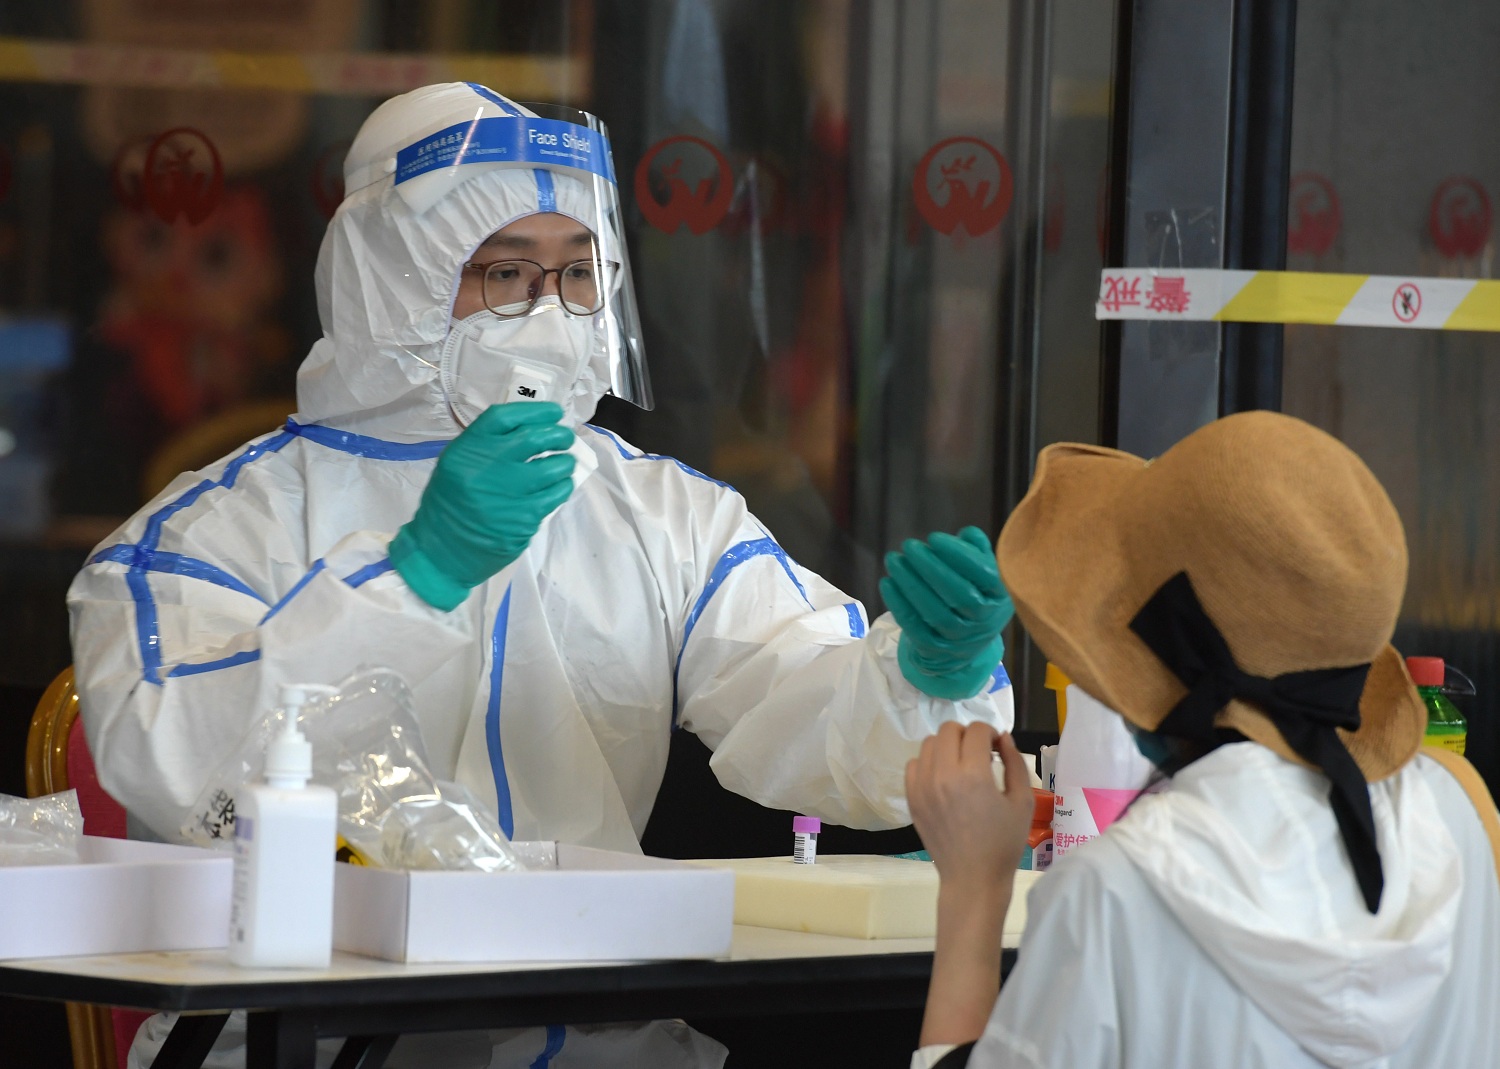 A woman is tested for the coronavirus in the Jiangsu Province of Beijing